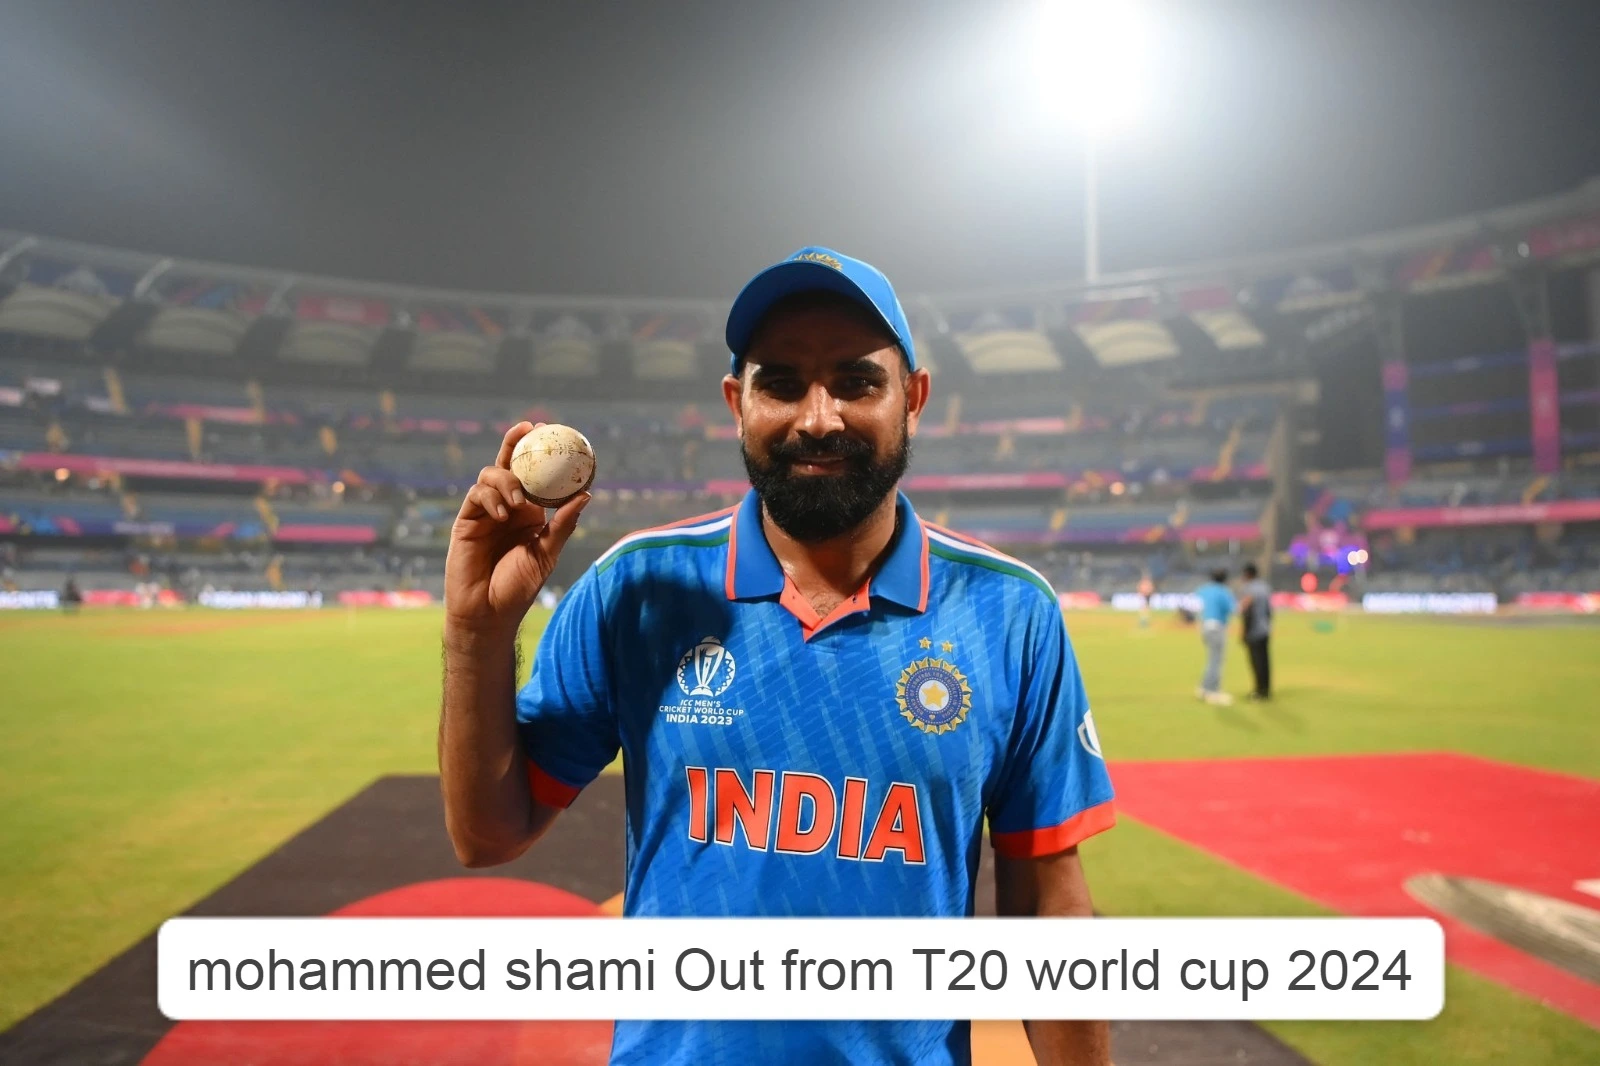 mohammad shami out from T20 World Cup